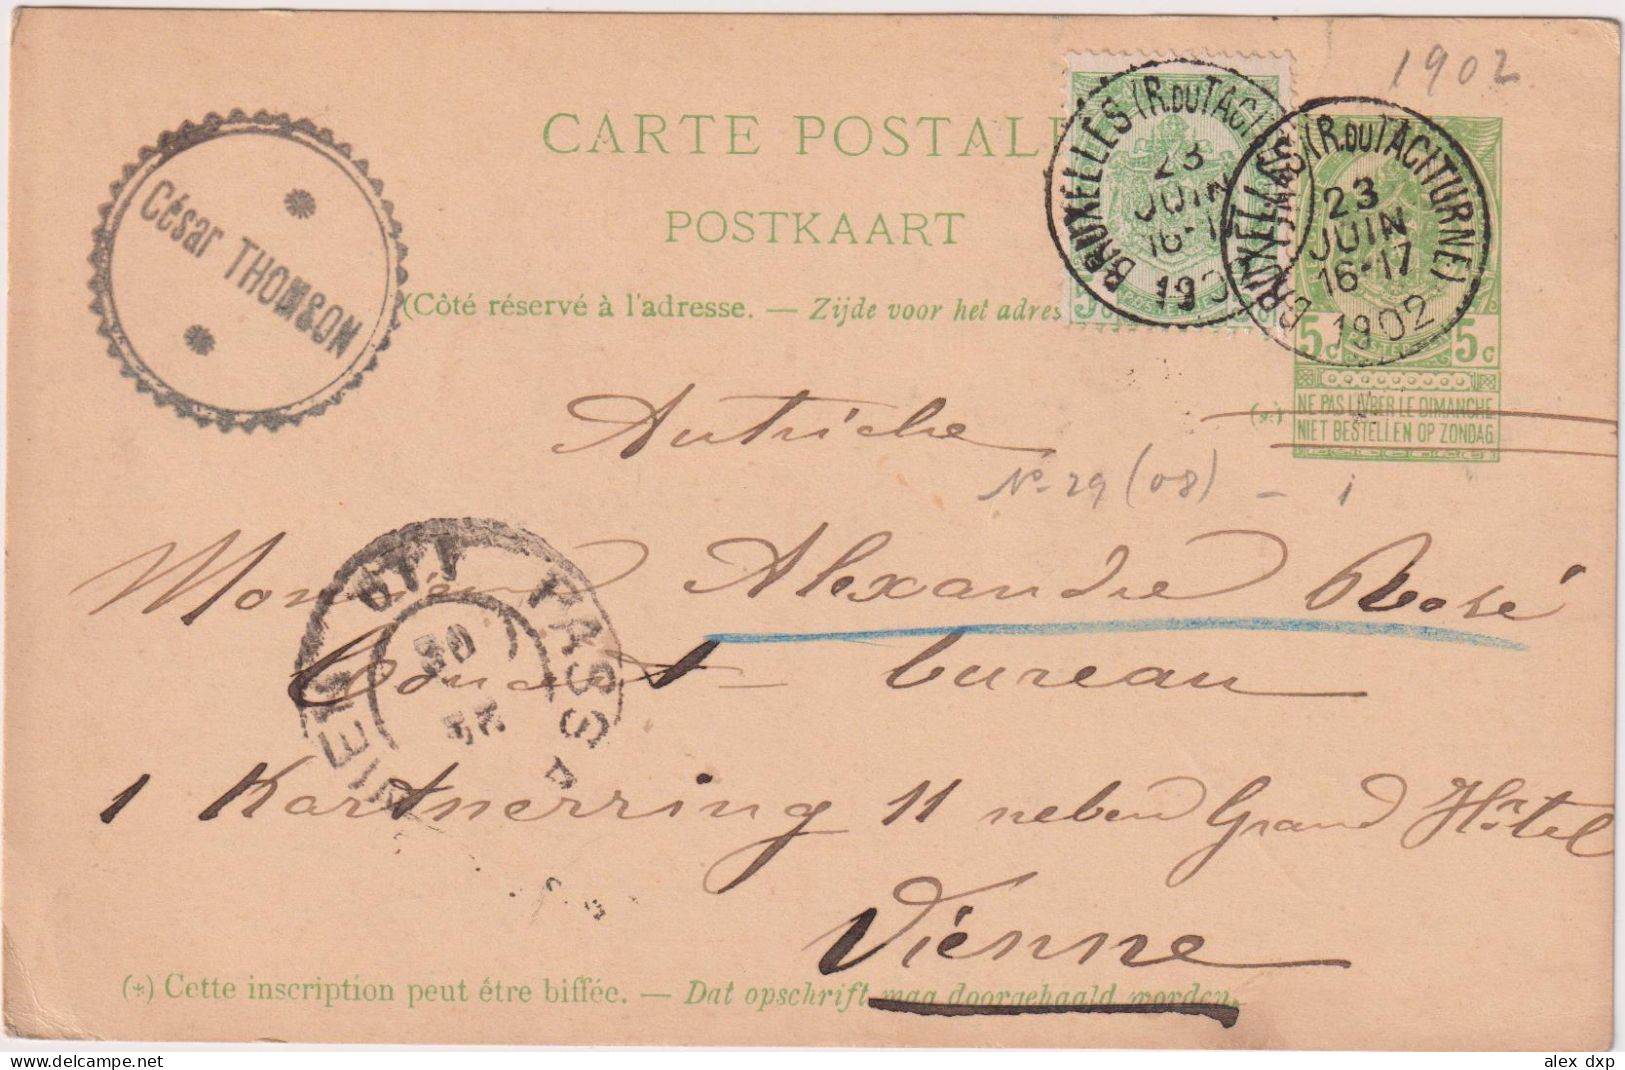 BELGIUM > 1902 POSTAL HISTORY > Stationary Card From Bruxelles To Vienne, Austria - 1893-1907 Armoiries